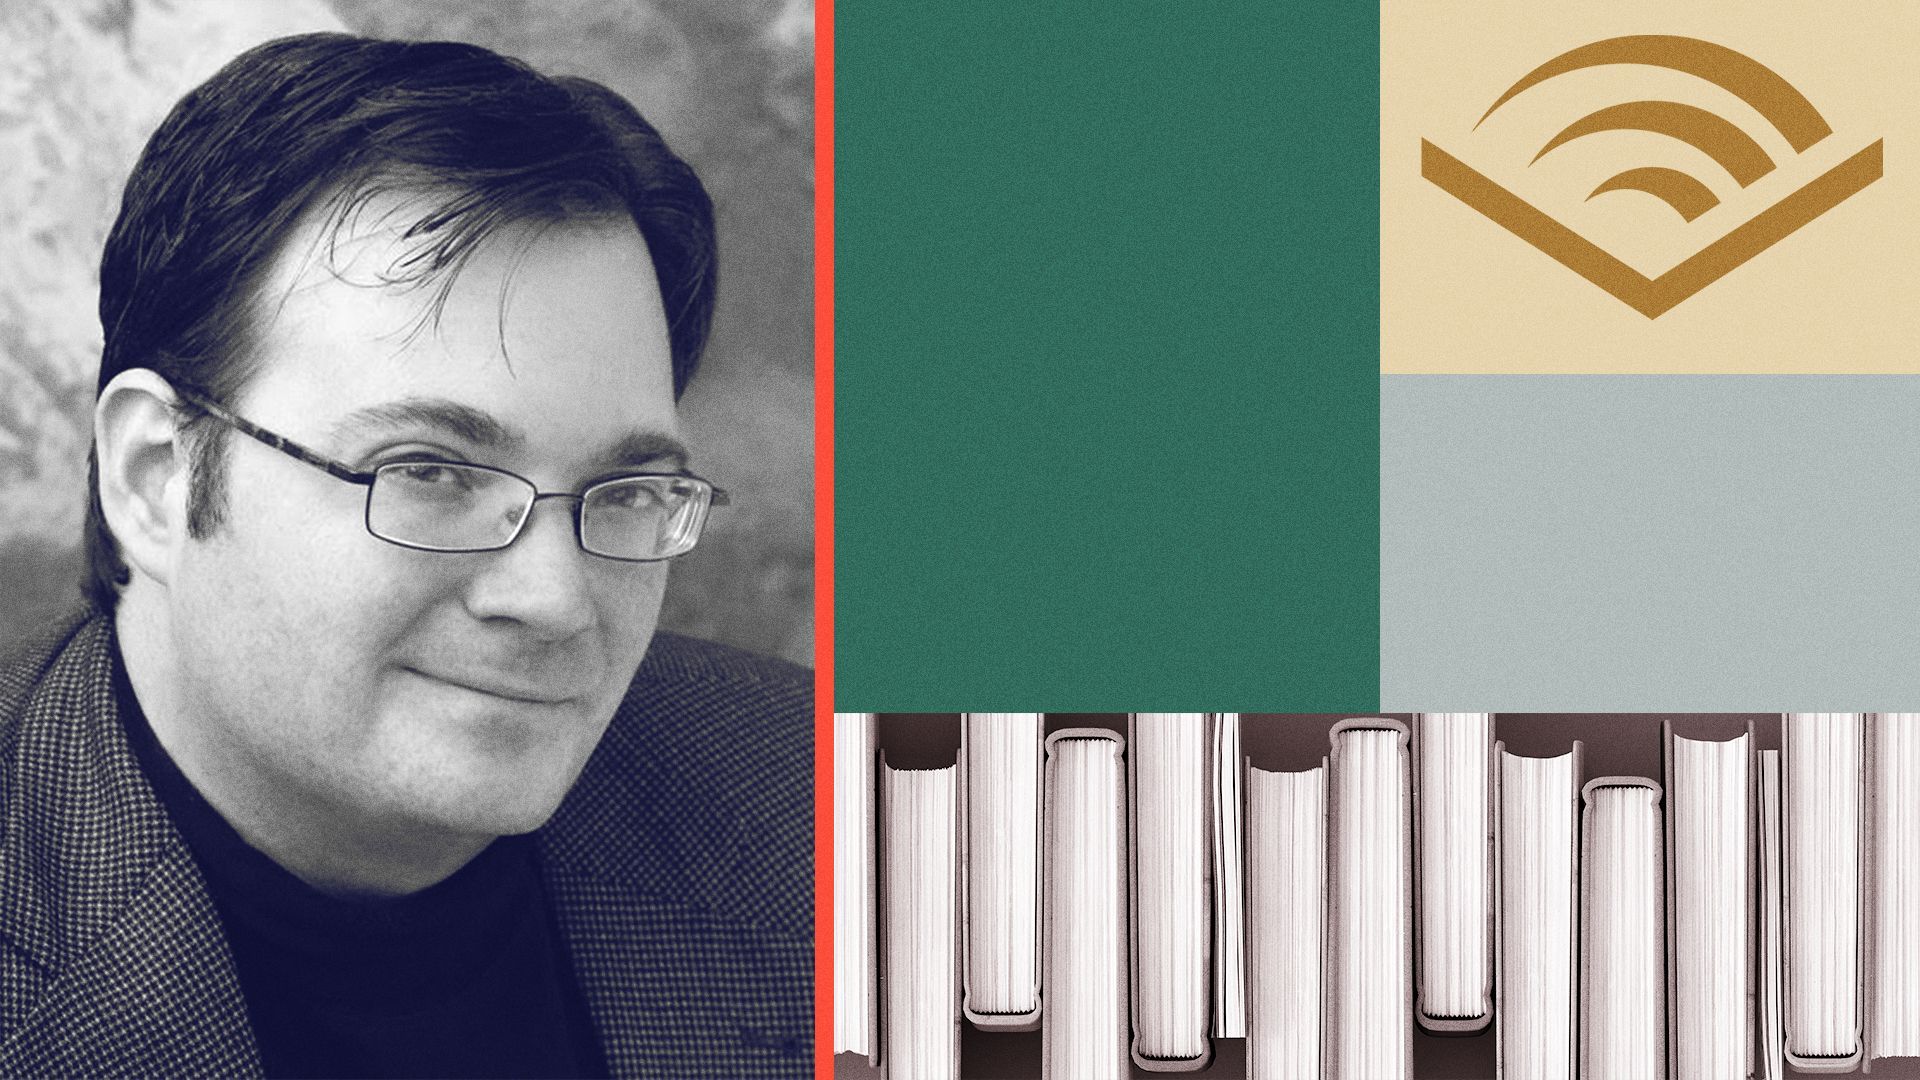 Photo illustration of Brandon Sanderson with Audible's logo and a stack of books.